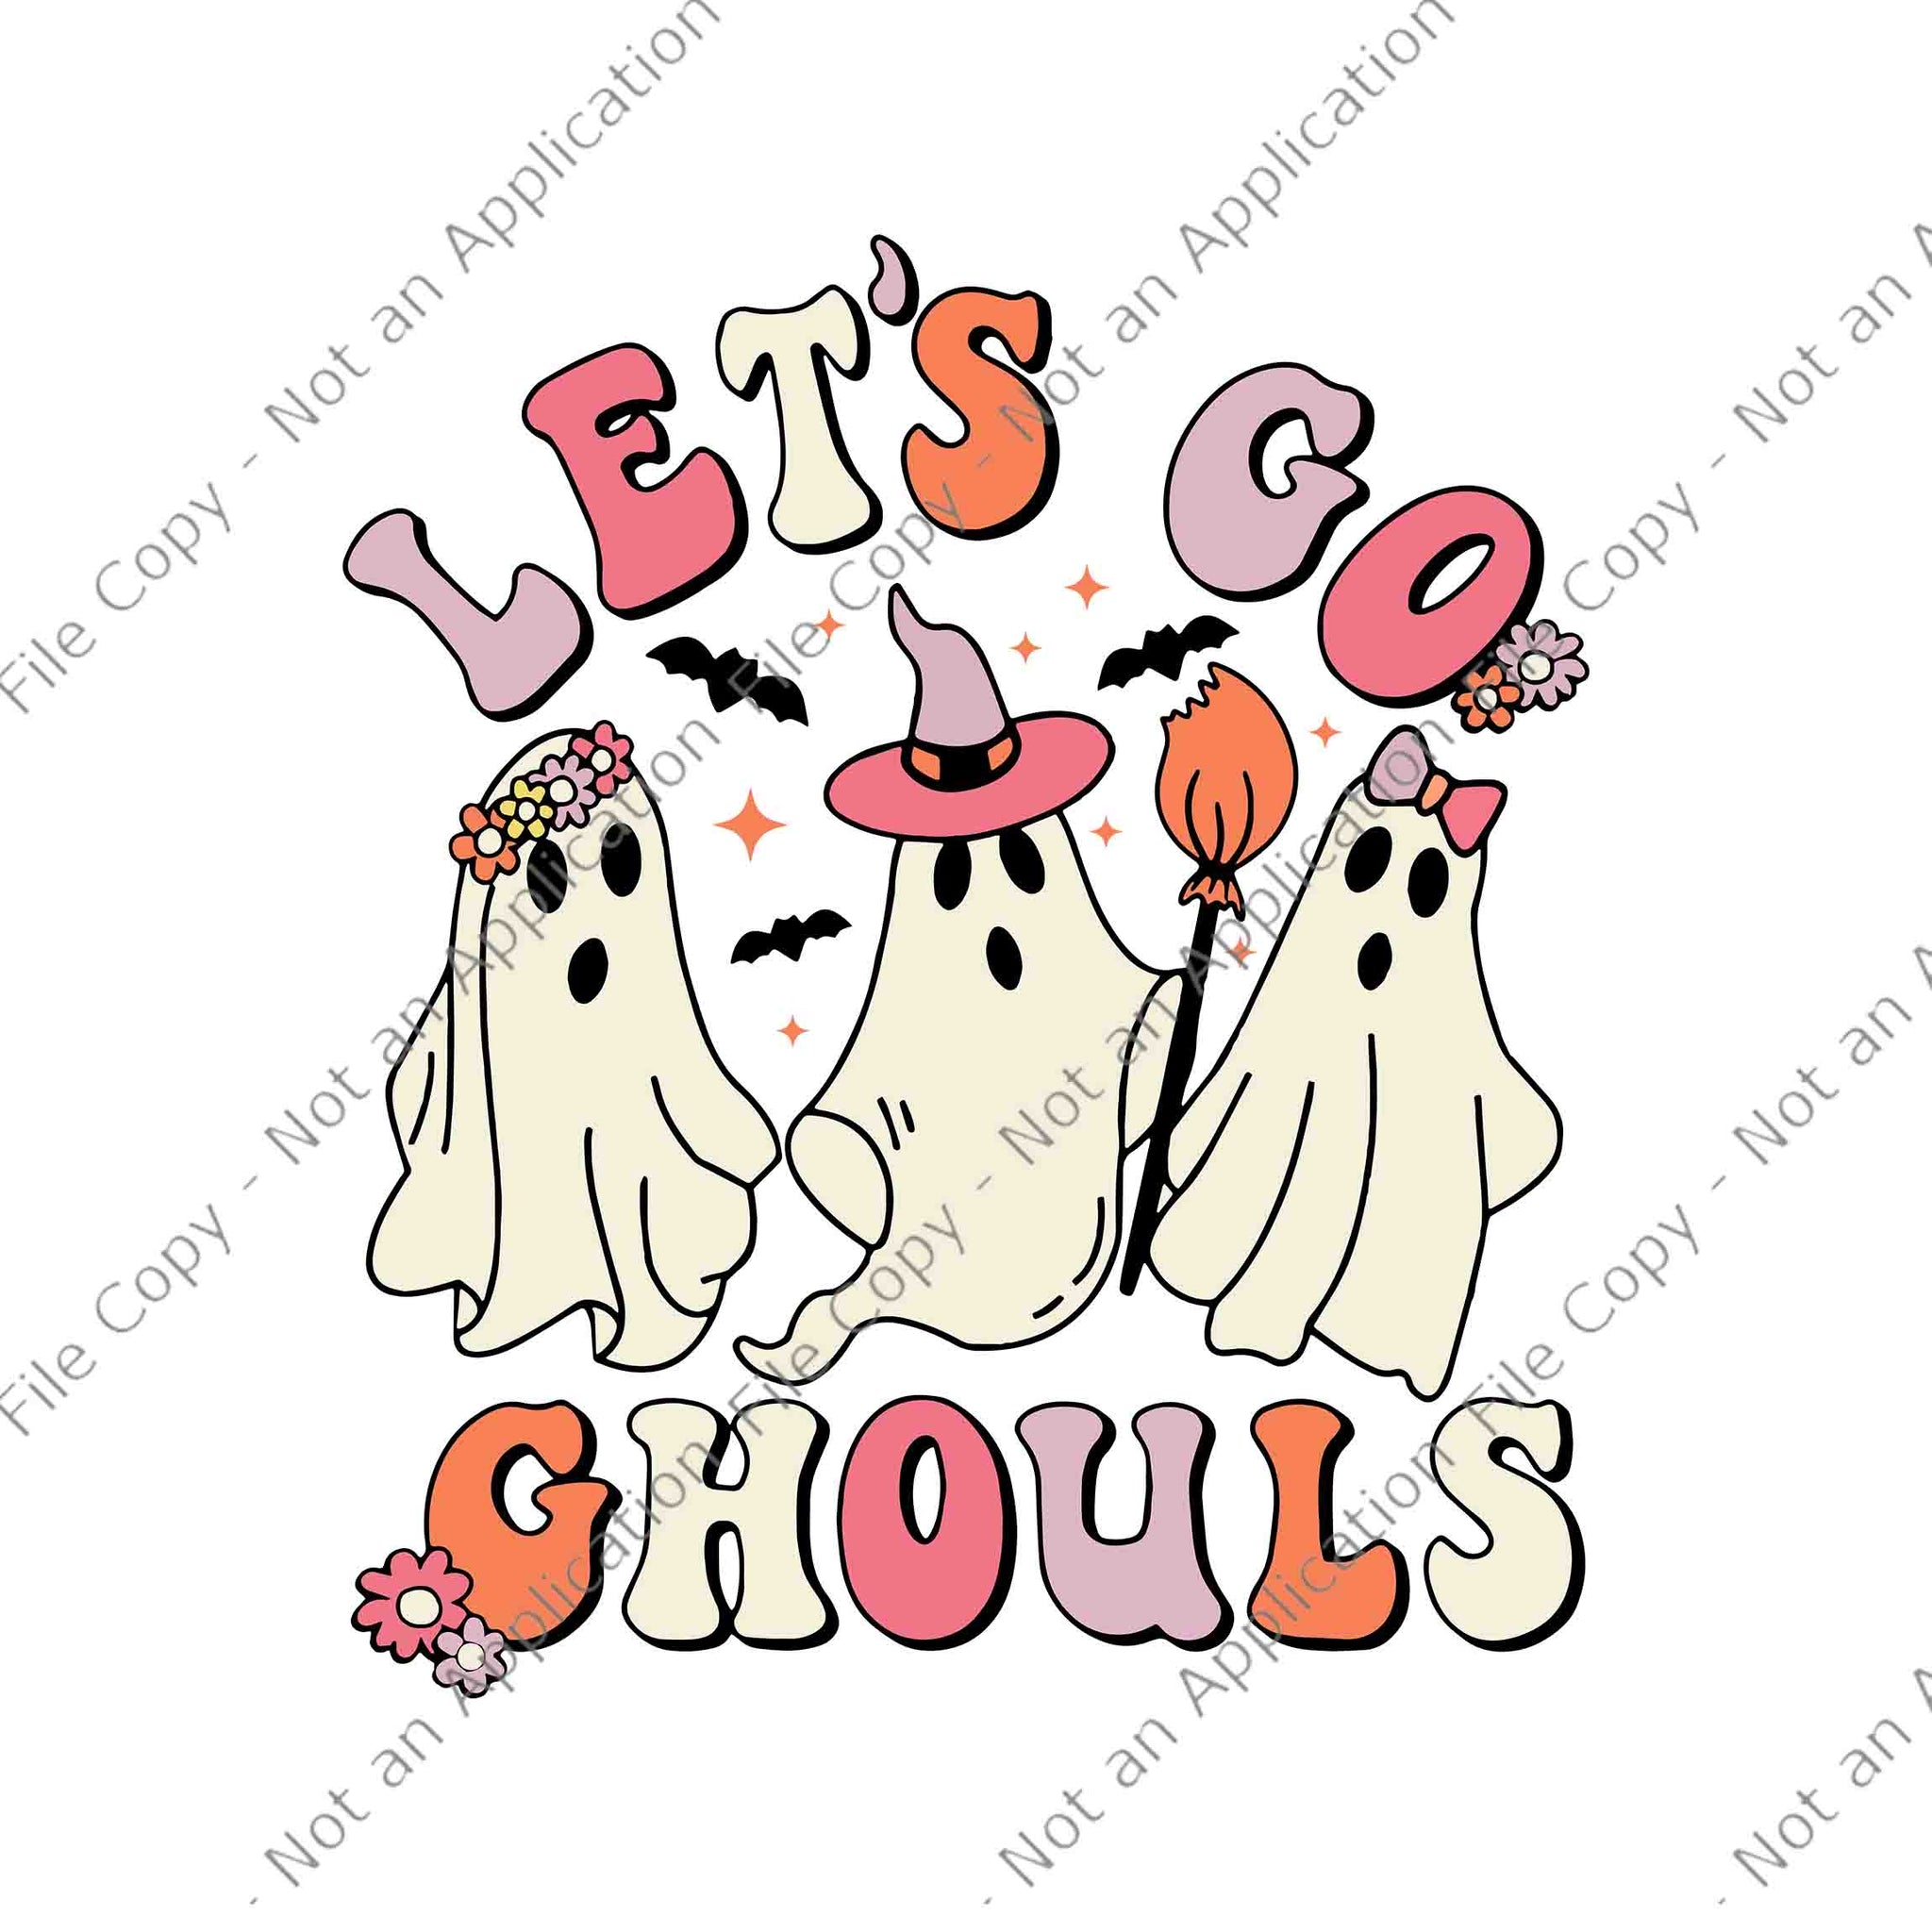 Groovy Let's Go Ghouls Halloween Ghost Svg, Ghost Halloween Svg, Ghost Svg, Halloween Svg